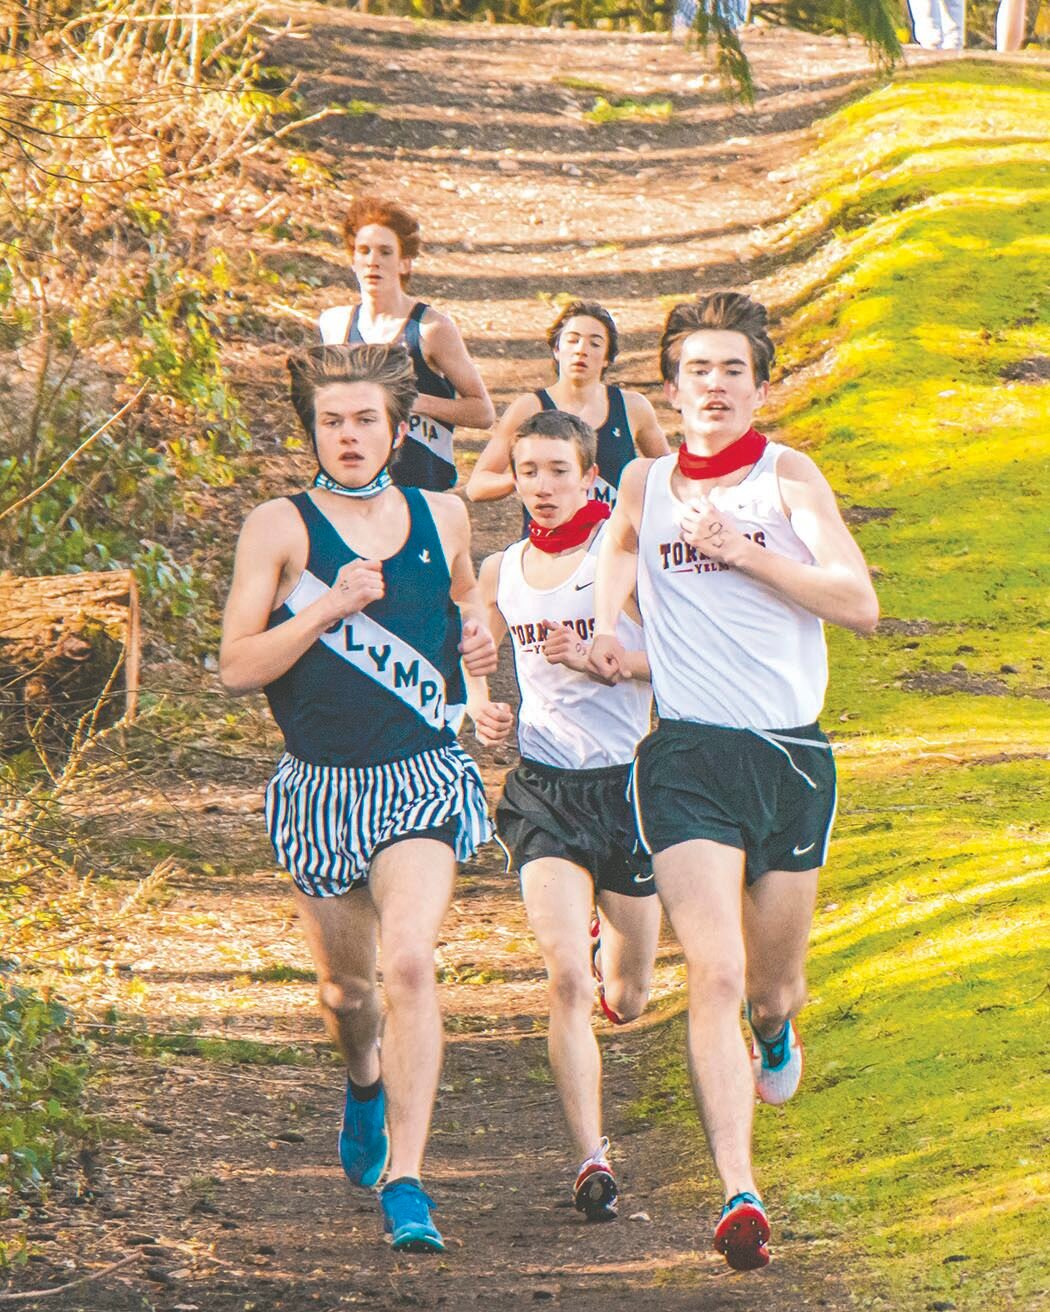 Runners from Olympia and Yelm make their way down a hill during a cross-country meet at LBA Park in Olympia on Saturday.